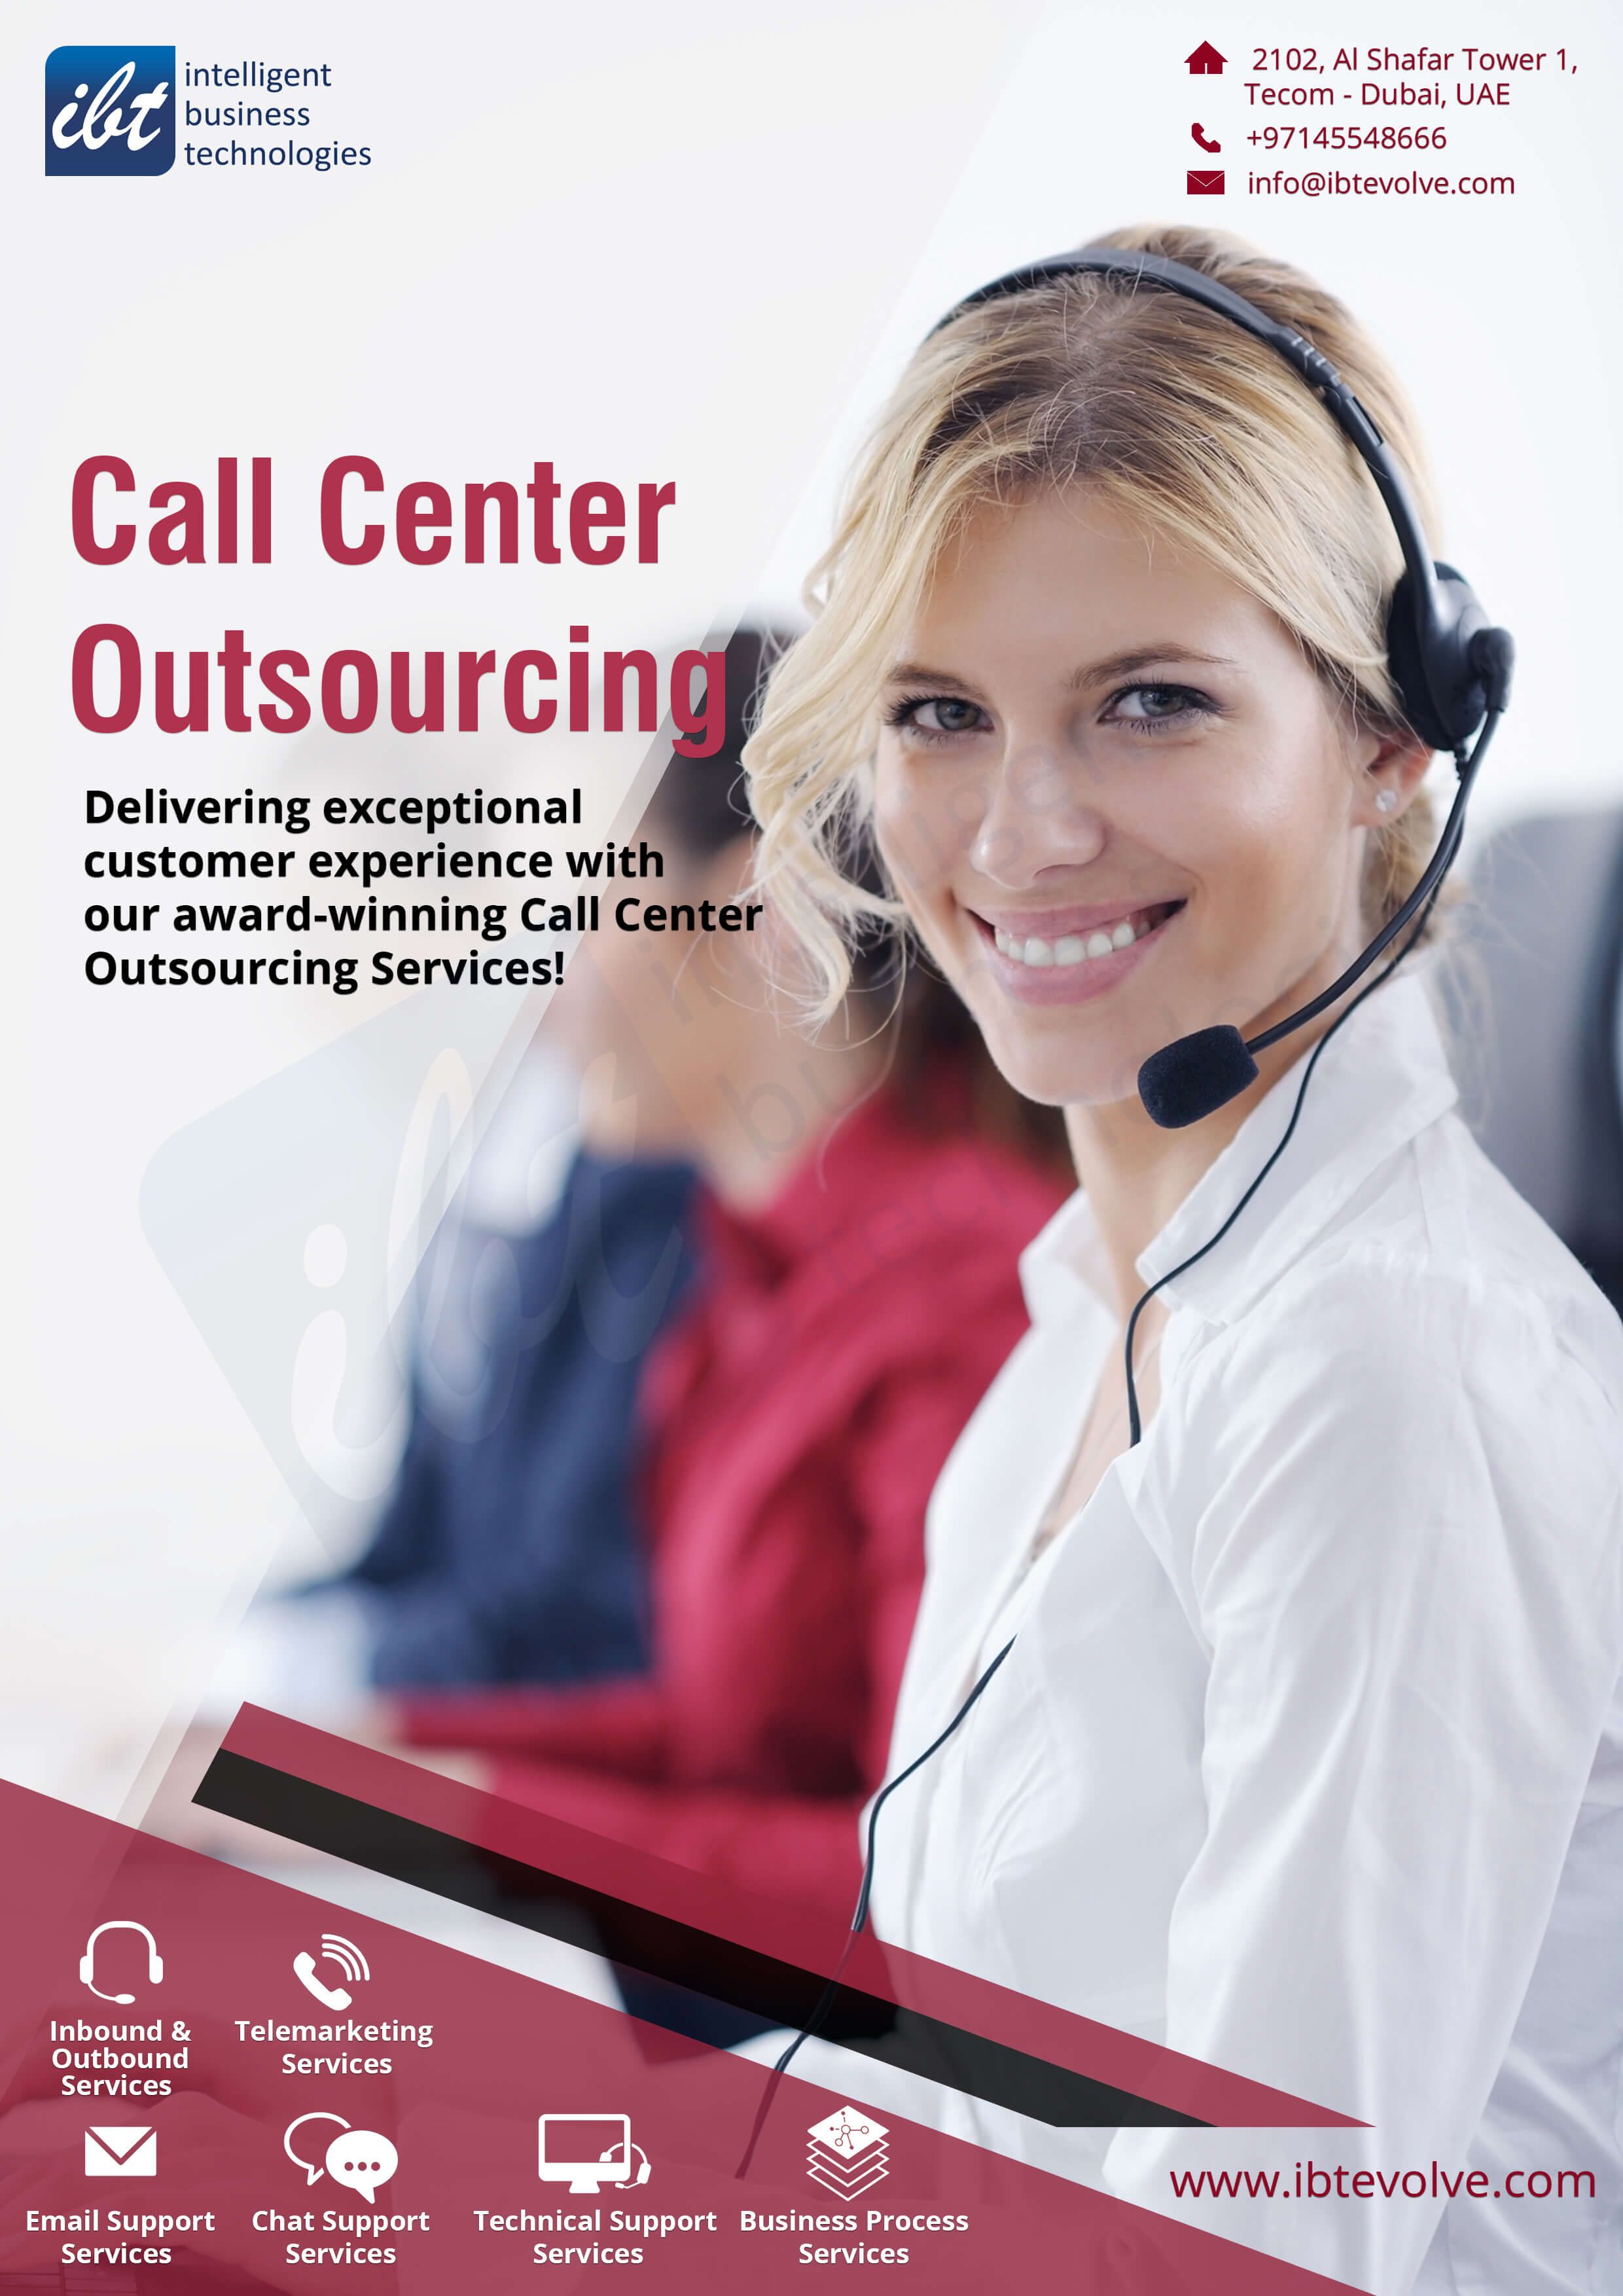 Explore Call Center Outsourcing for Business Growth